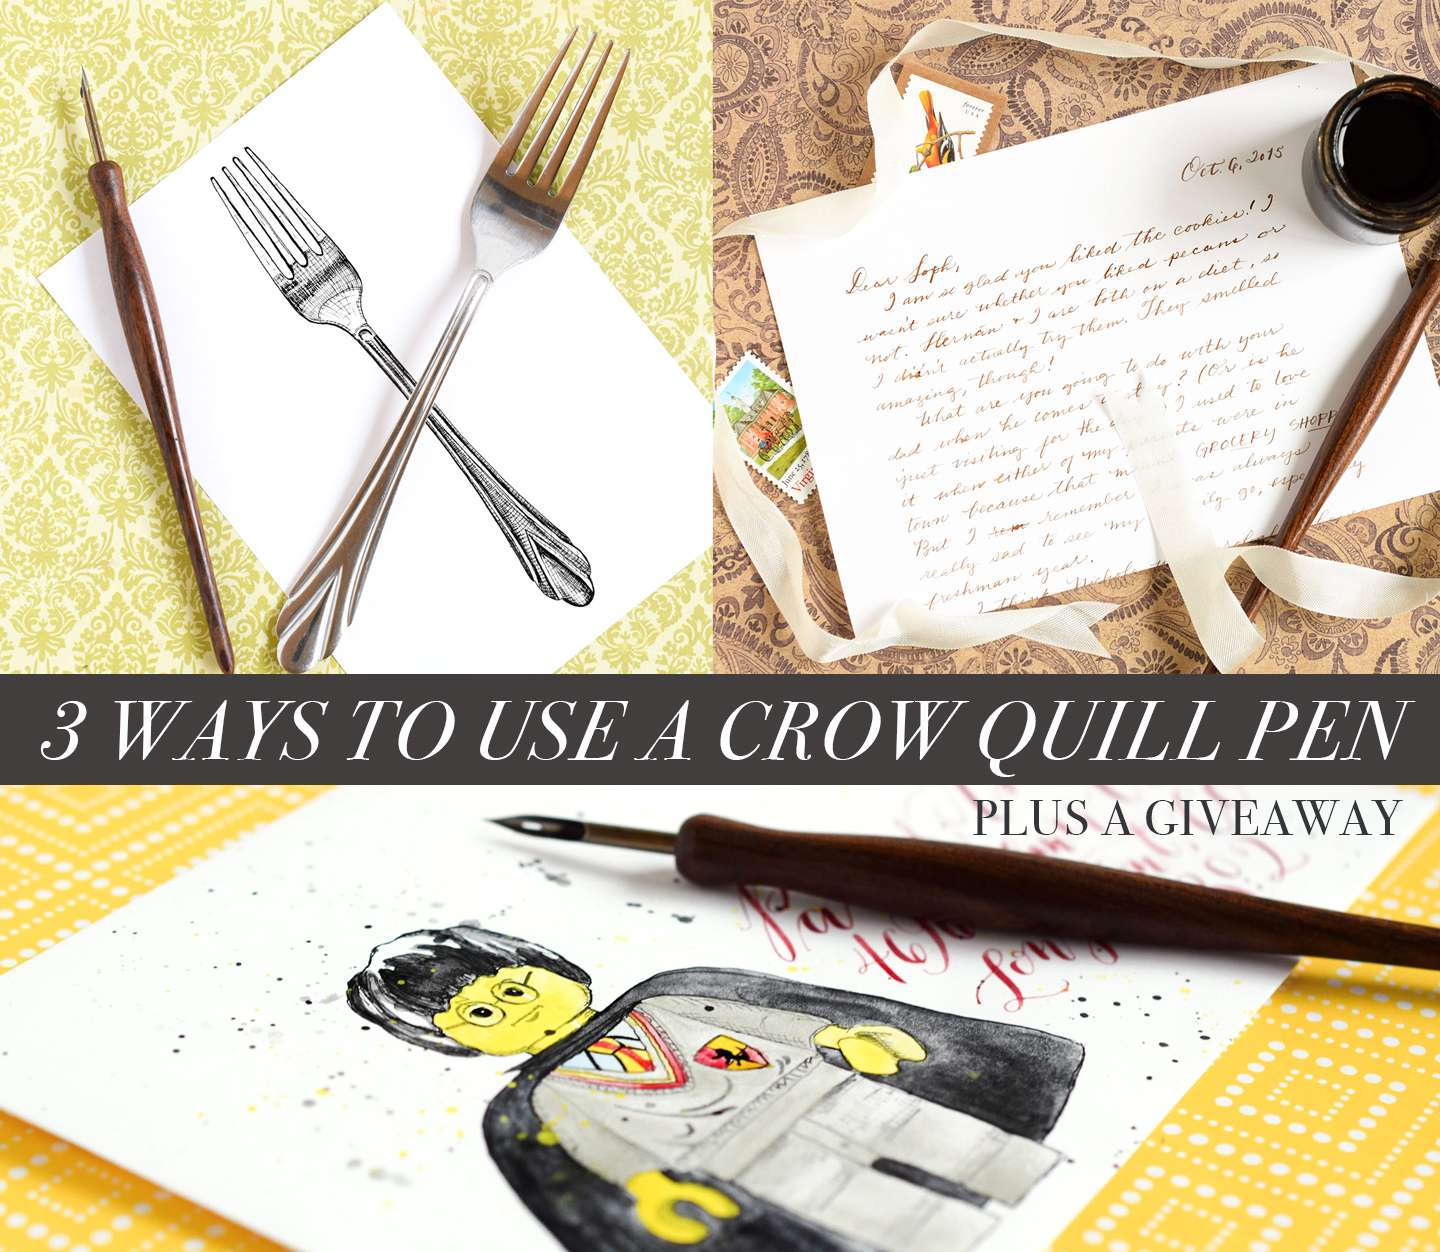 3 Ways to Use a Crow Quill Pen